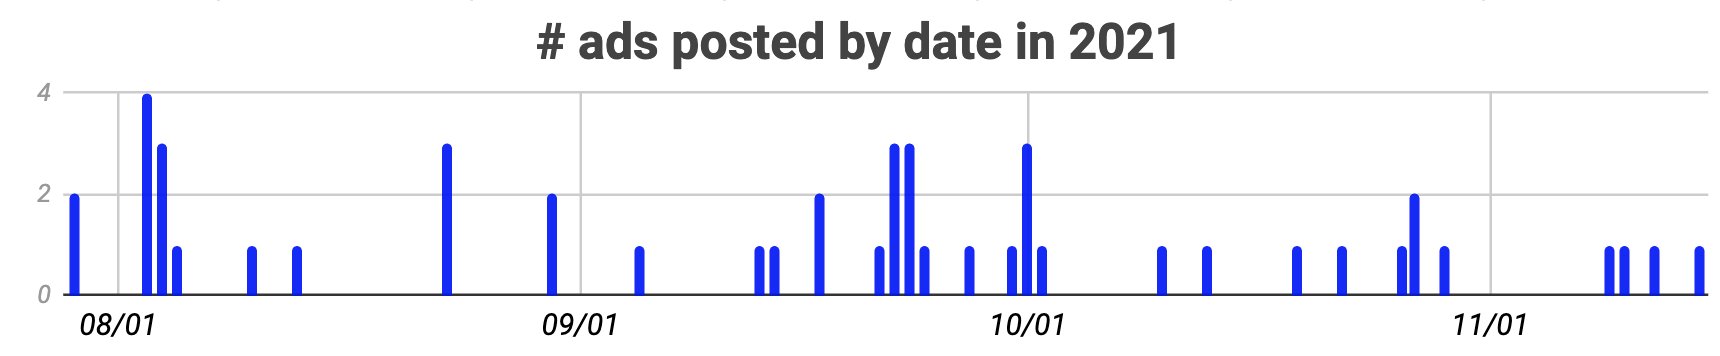 Bar graph showing distribution of ad postings from last year - there is an early cluster at the beginning of August, and with some exceptions, another larger cluster starting in mid-September through the beginning of October... then sporadic additions until December.